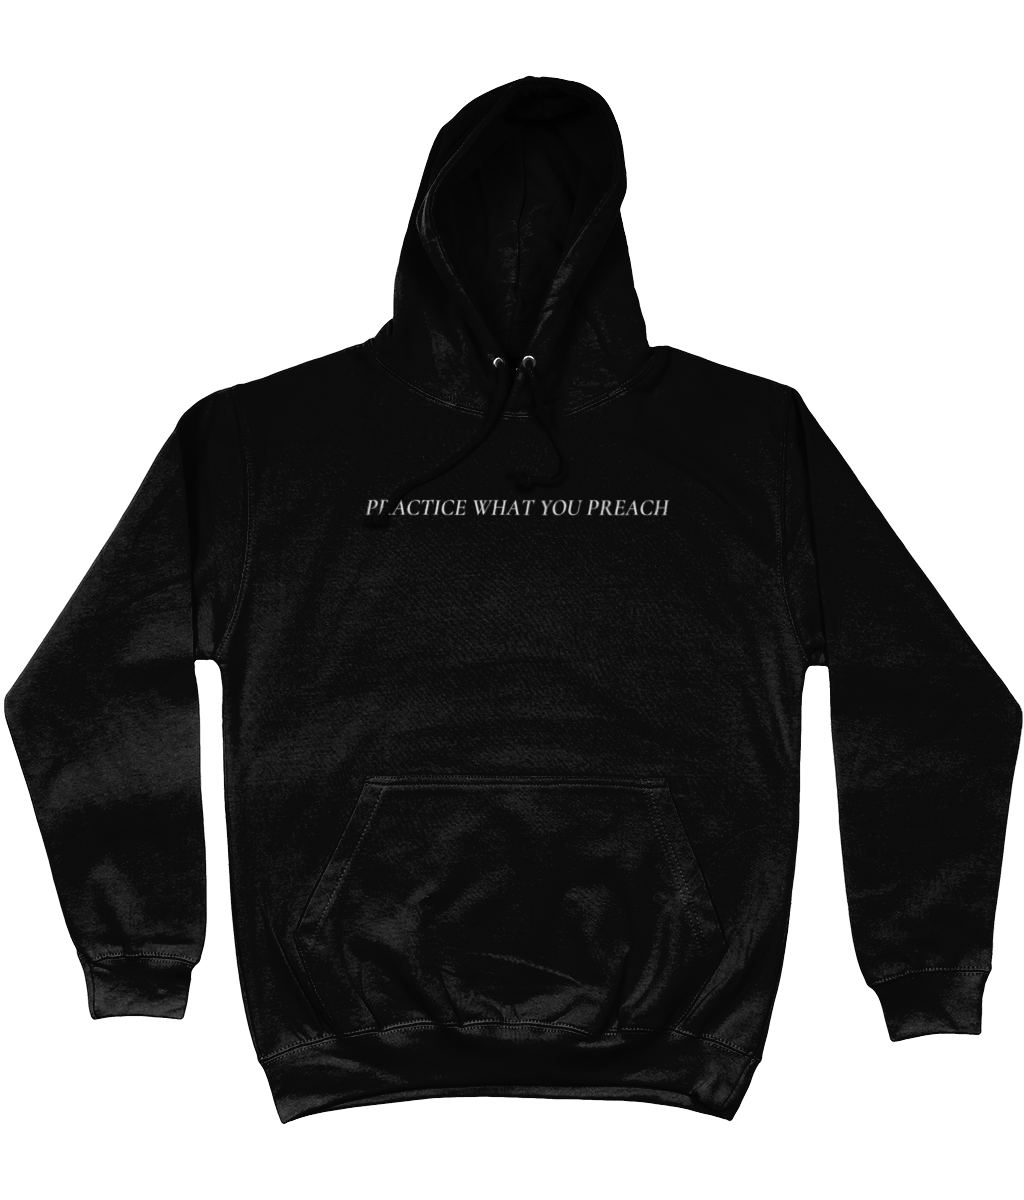 PRACTICE WHAT YOU PREACH HOODIE